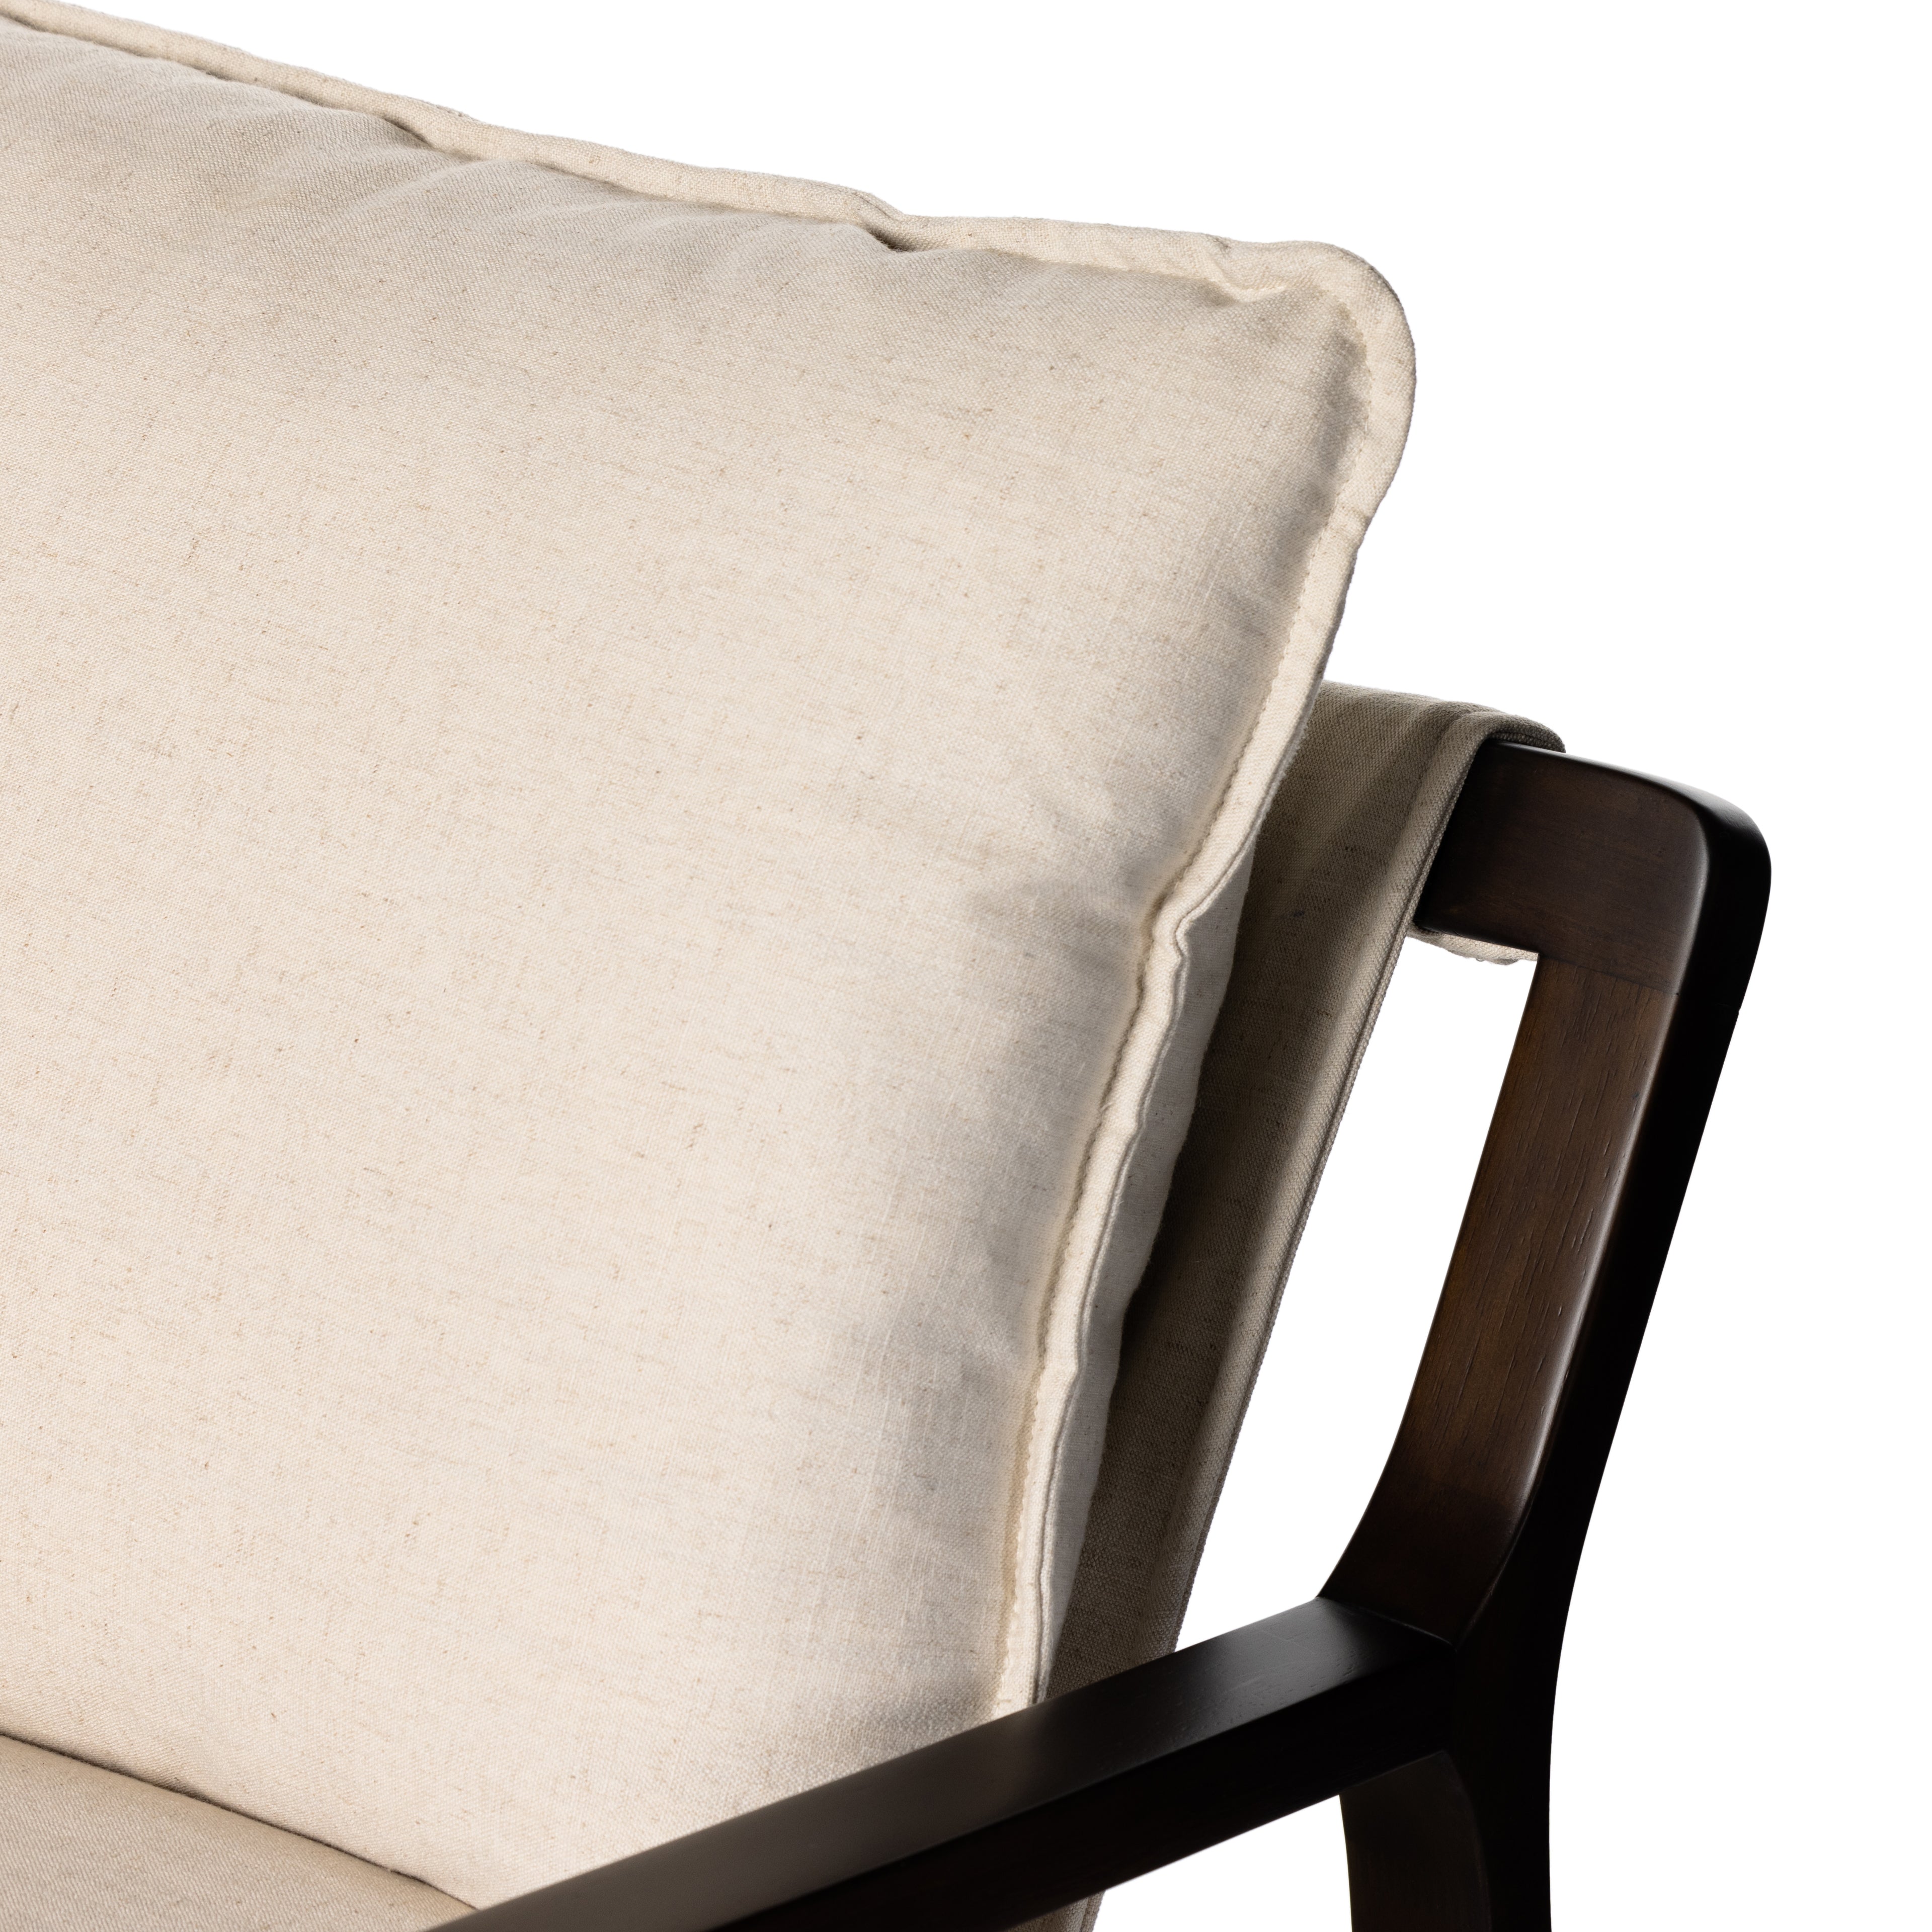 Savile Flax Fabric with Burnt Parawood | Ace Chair | Valley Ridge Furniture